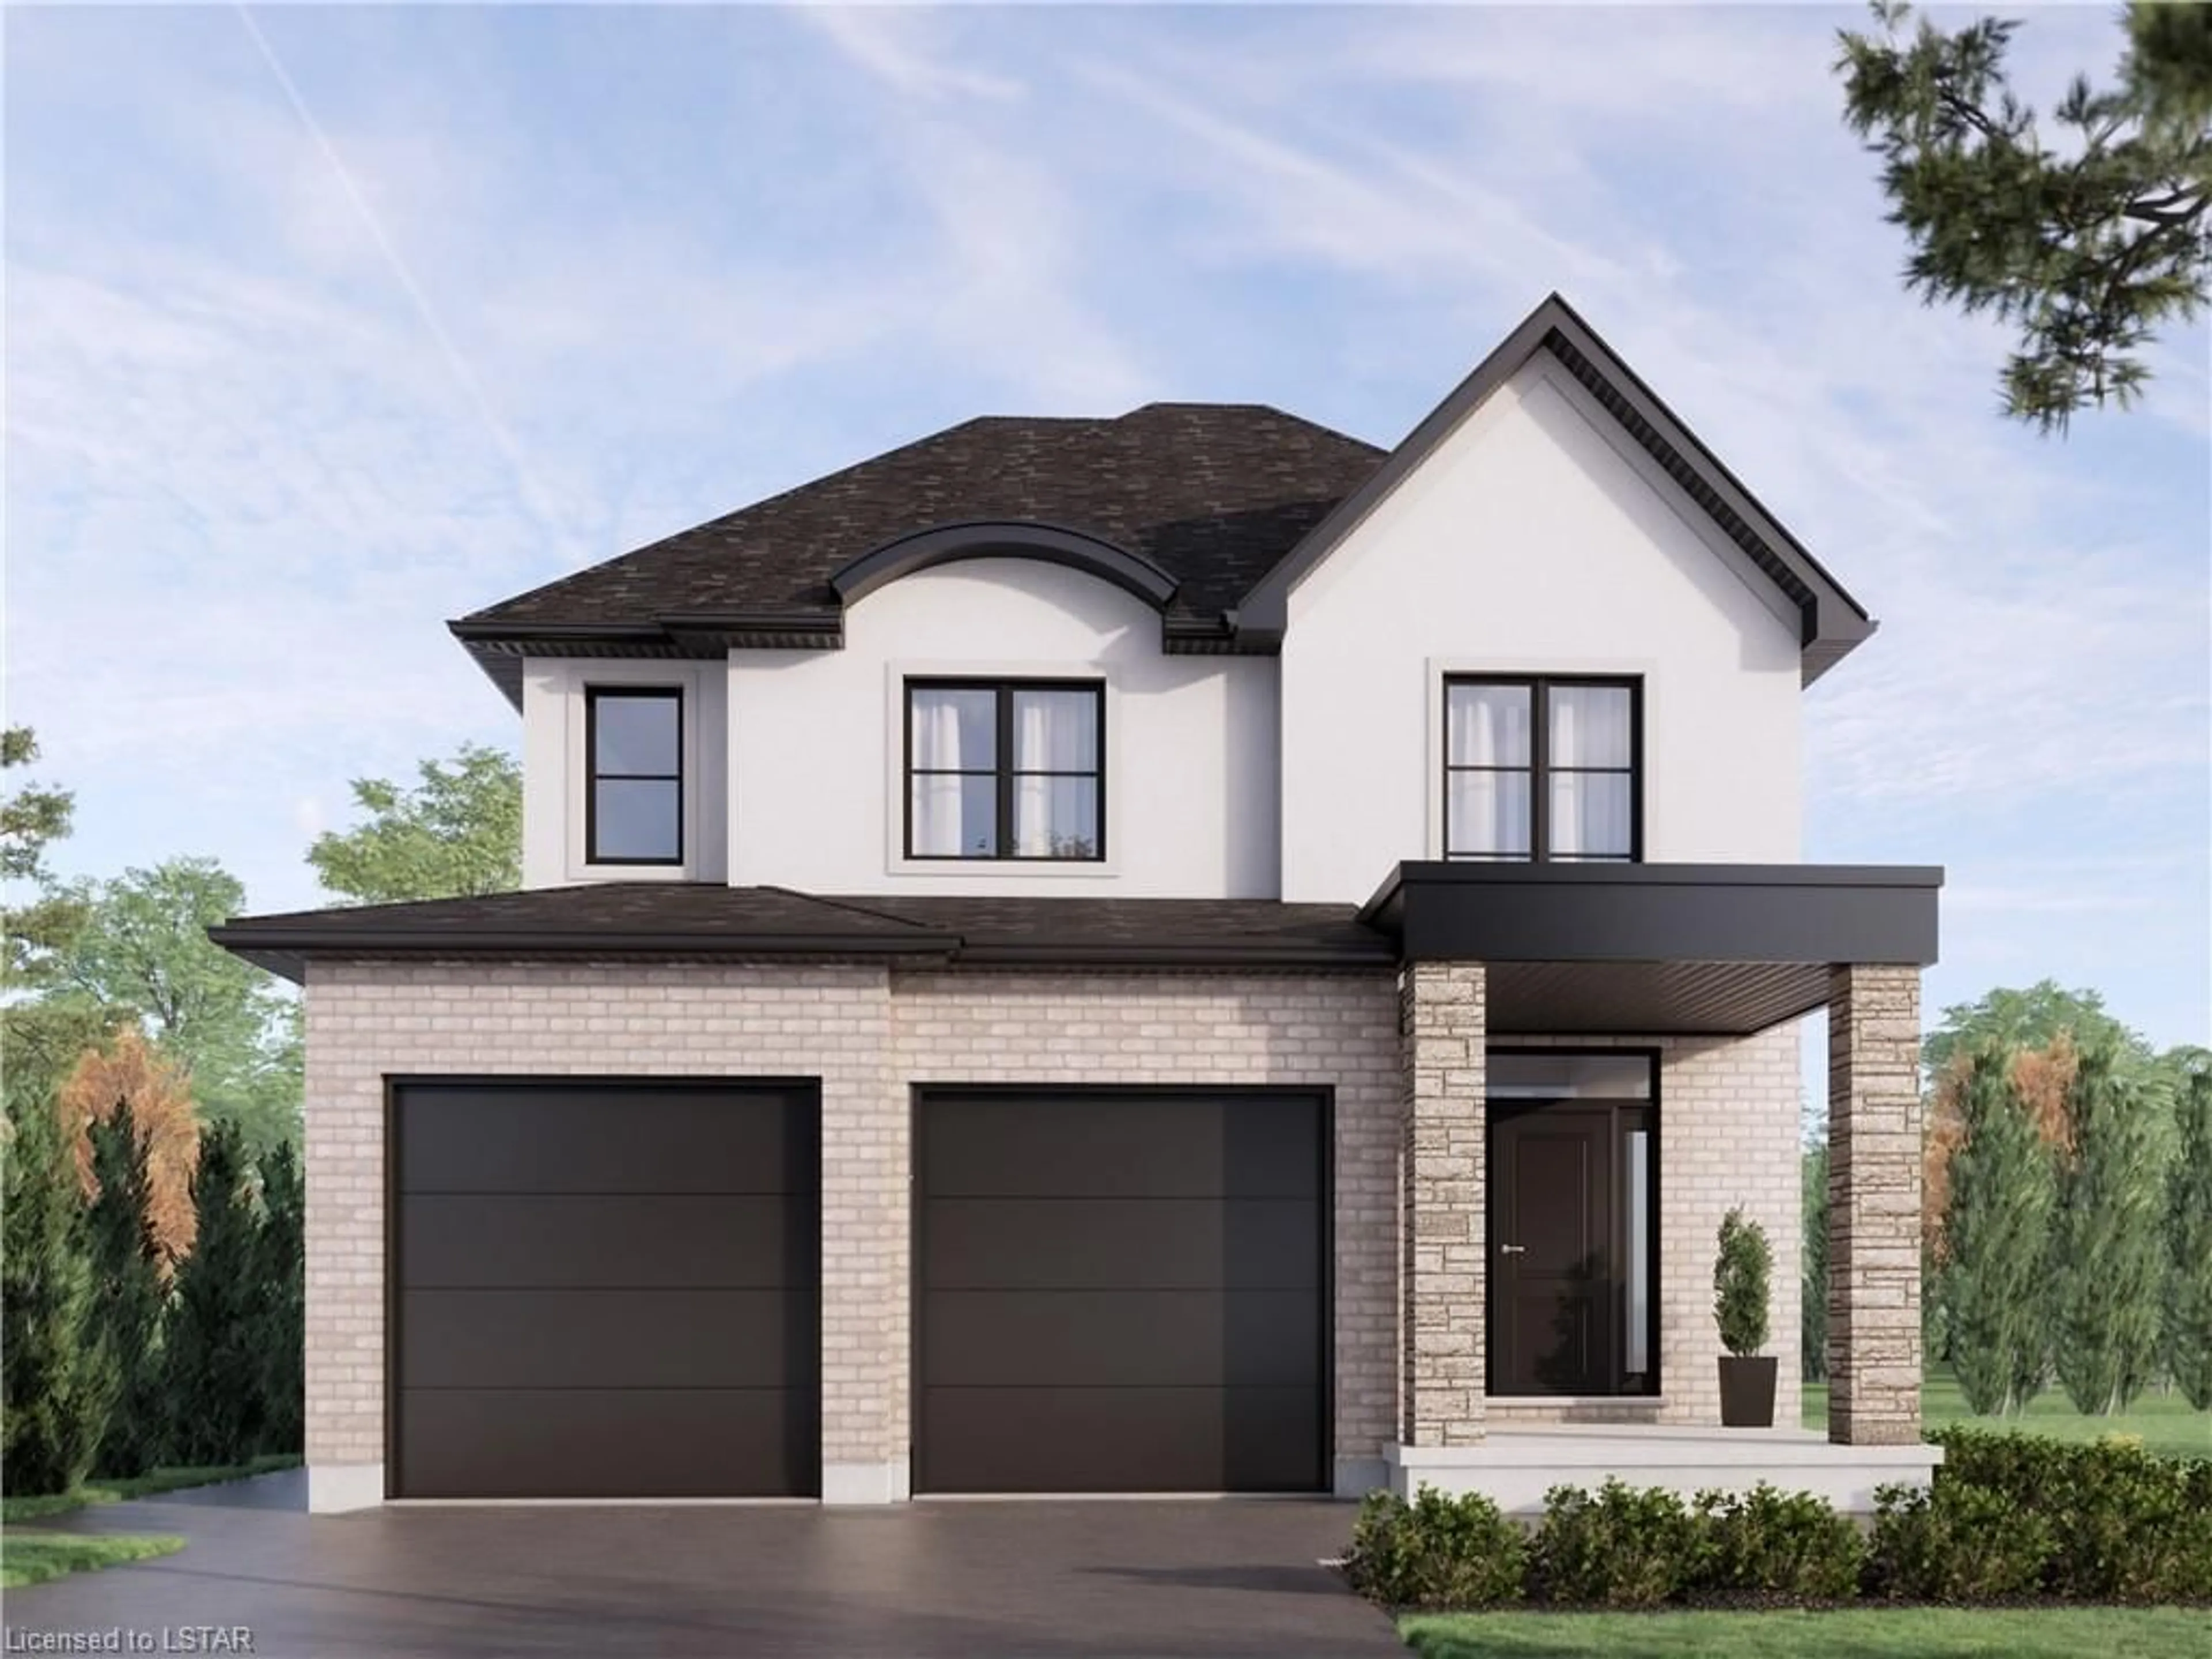 Home with brick exterior material for LOT 23 Linkway Blvd, London Ontario N6K 0K9